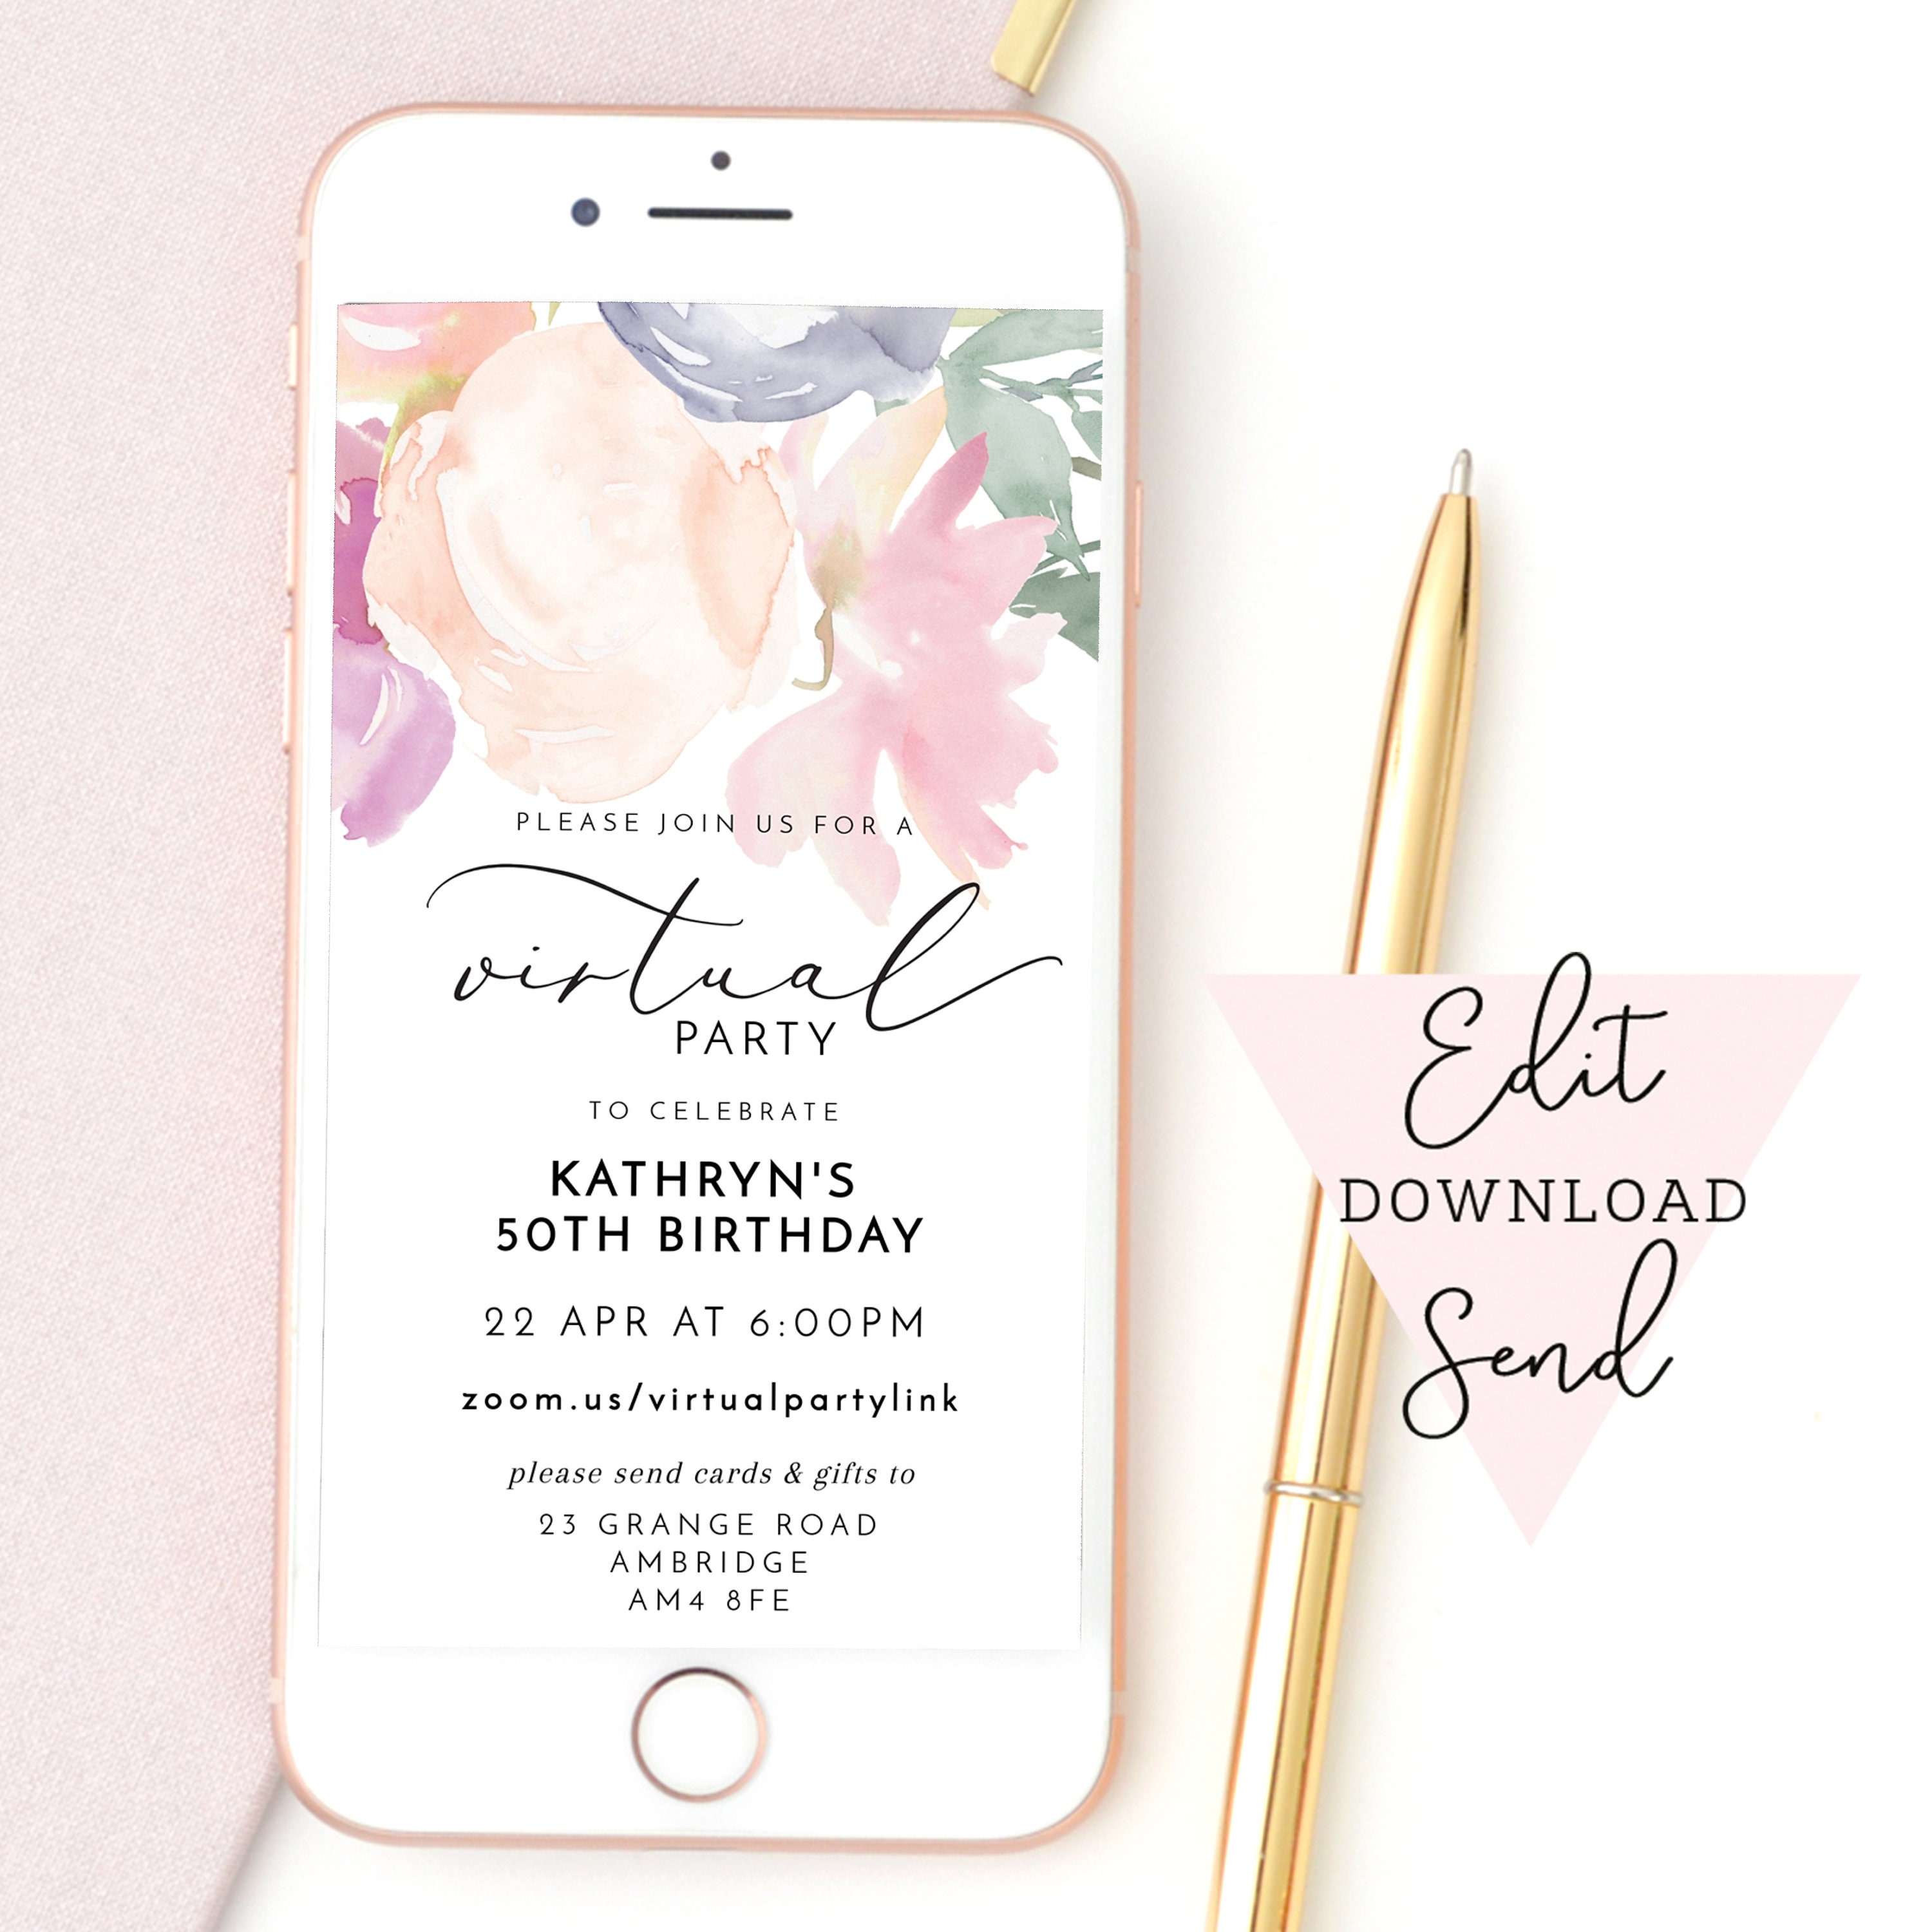 Virtual Birthday Anniversary Party Editable Electronic Smart Phone WhatsApp Email Invitation Pink Watercolour Roses